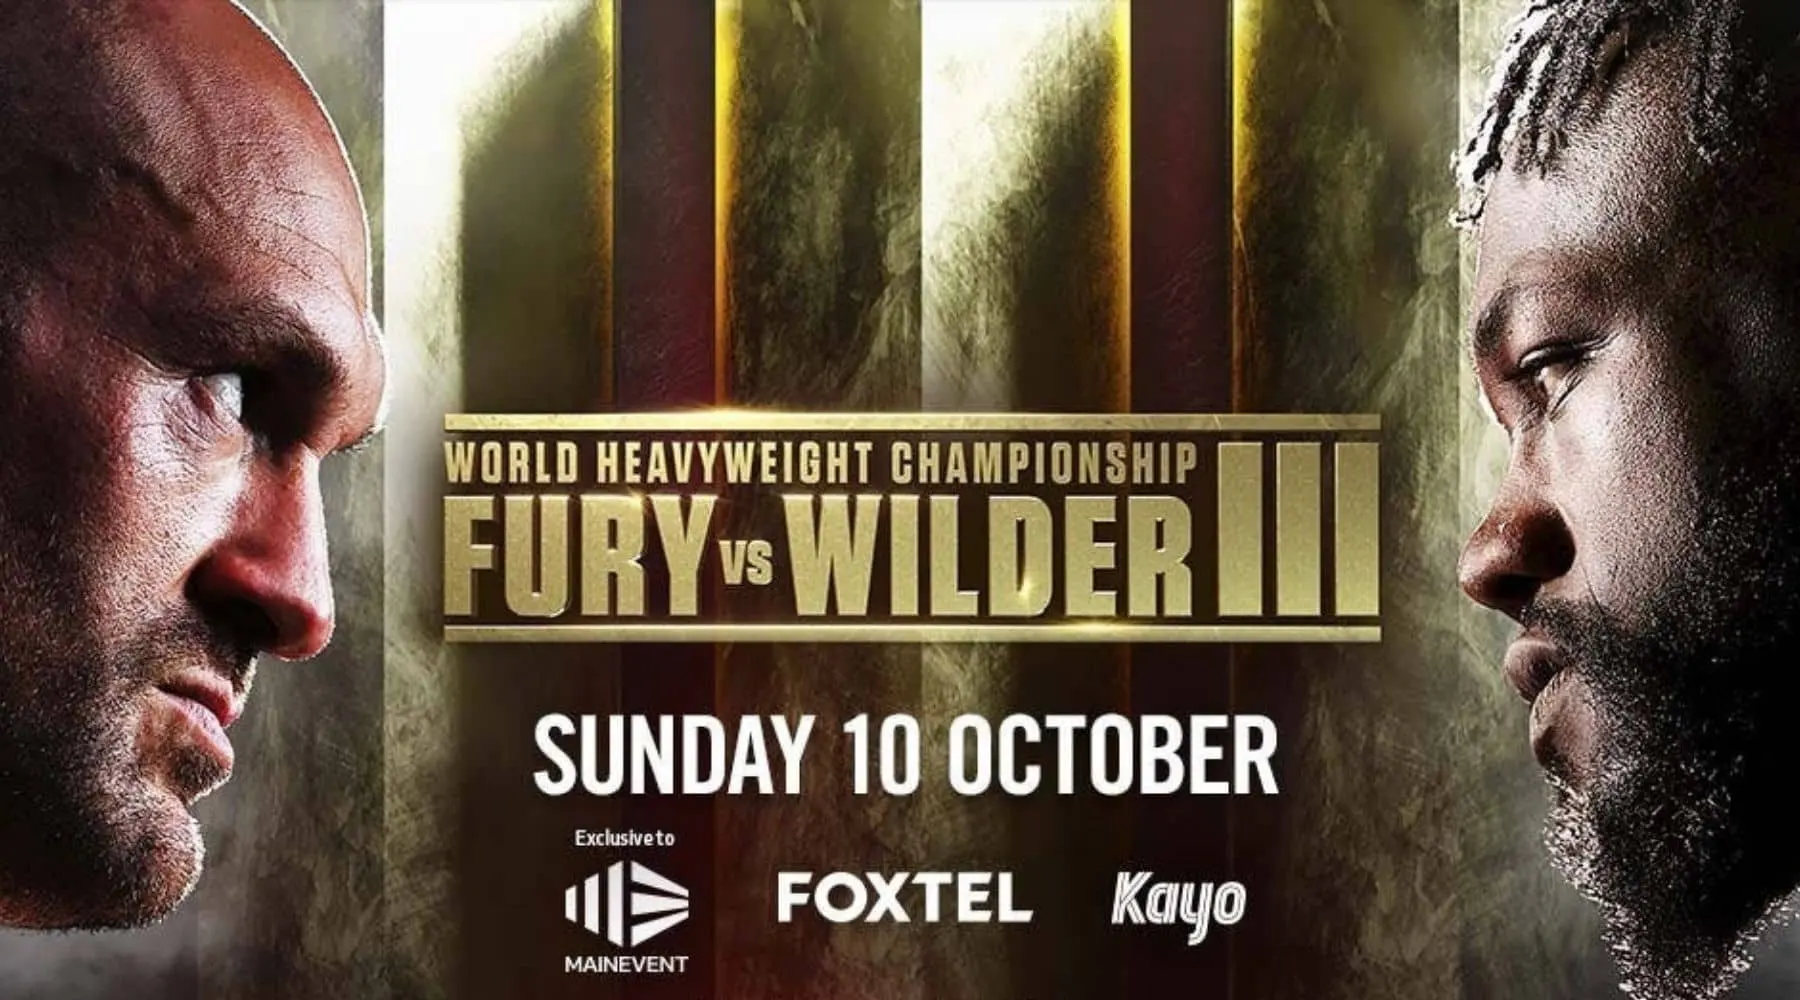 How to watch Tyson Fury vs Deontay Wilder 3 boxing live in Australia